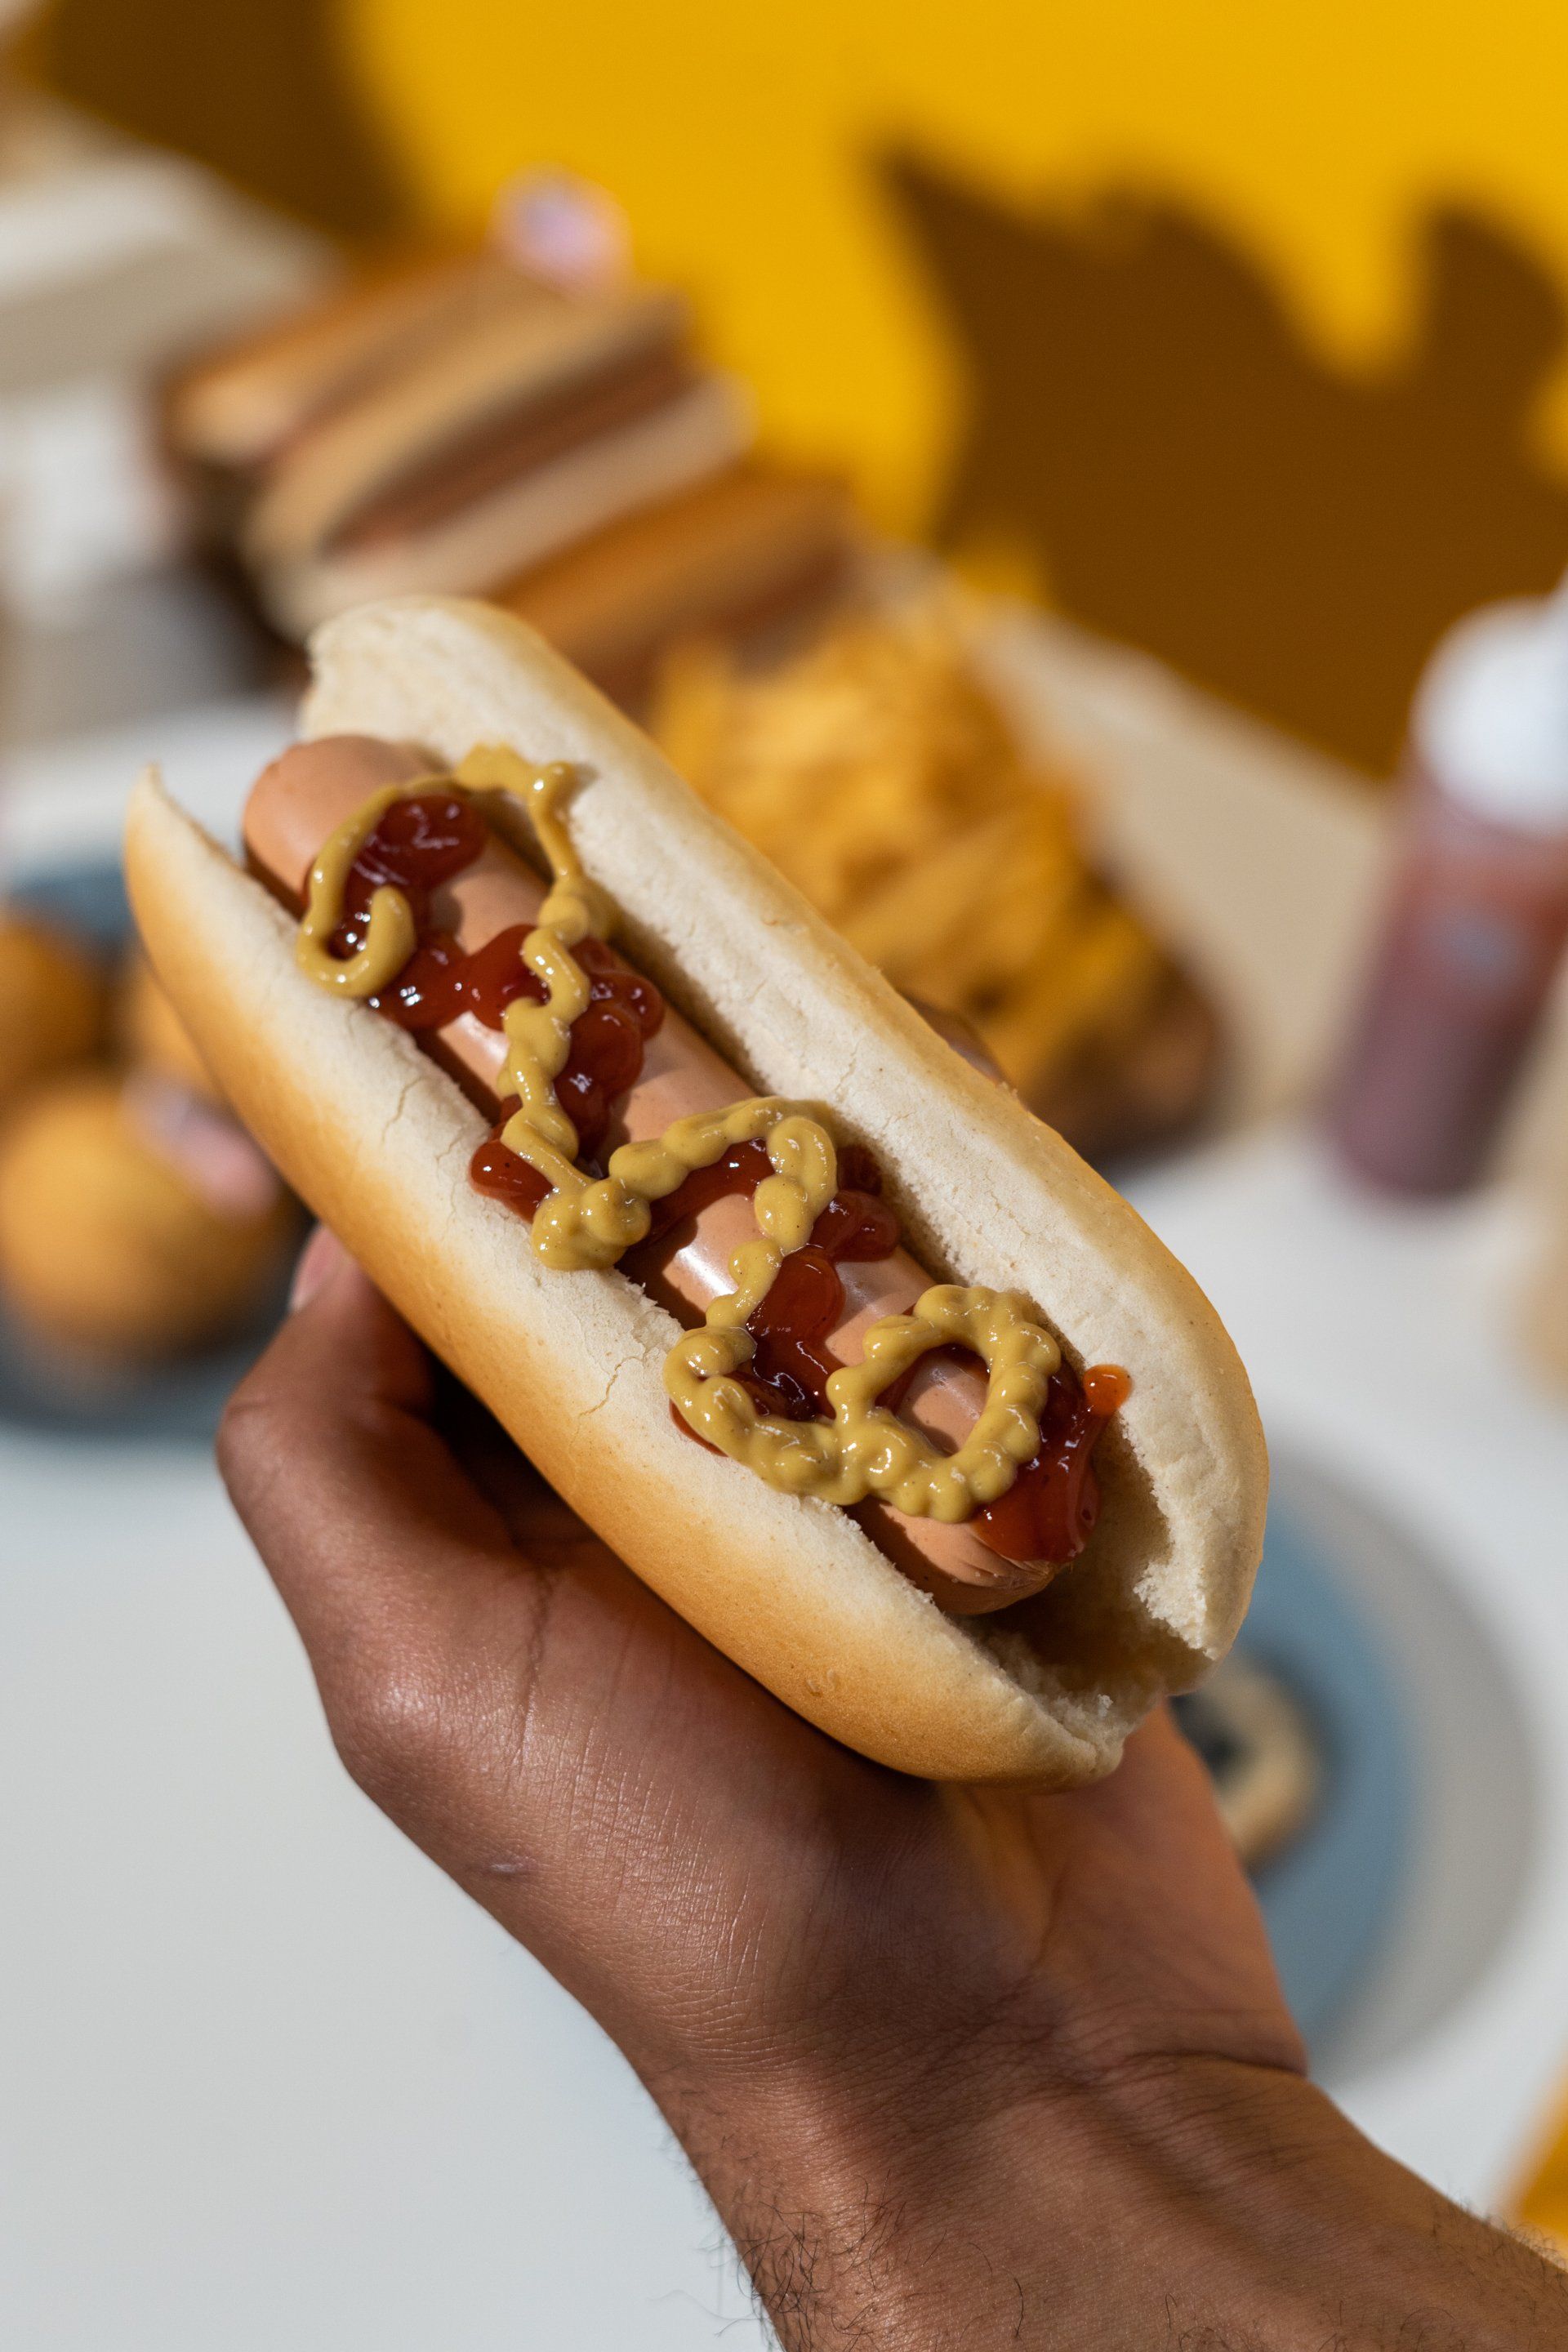 a person is holding a hot dog with ketchup and mustard .